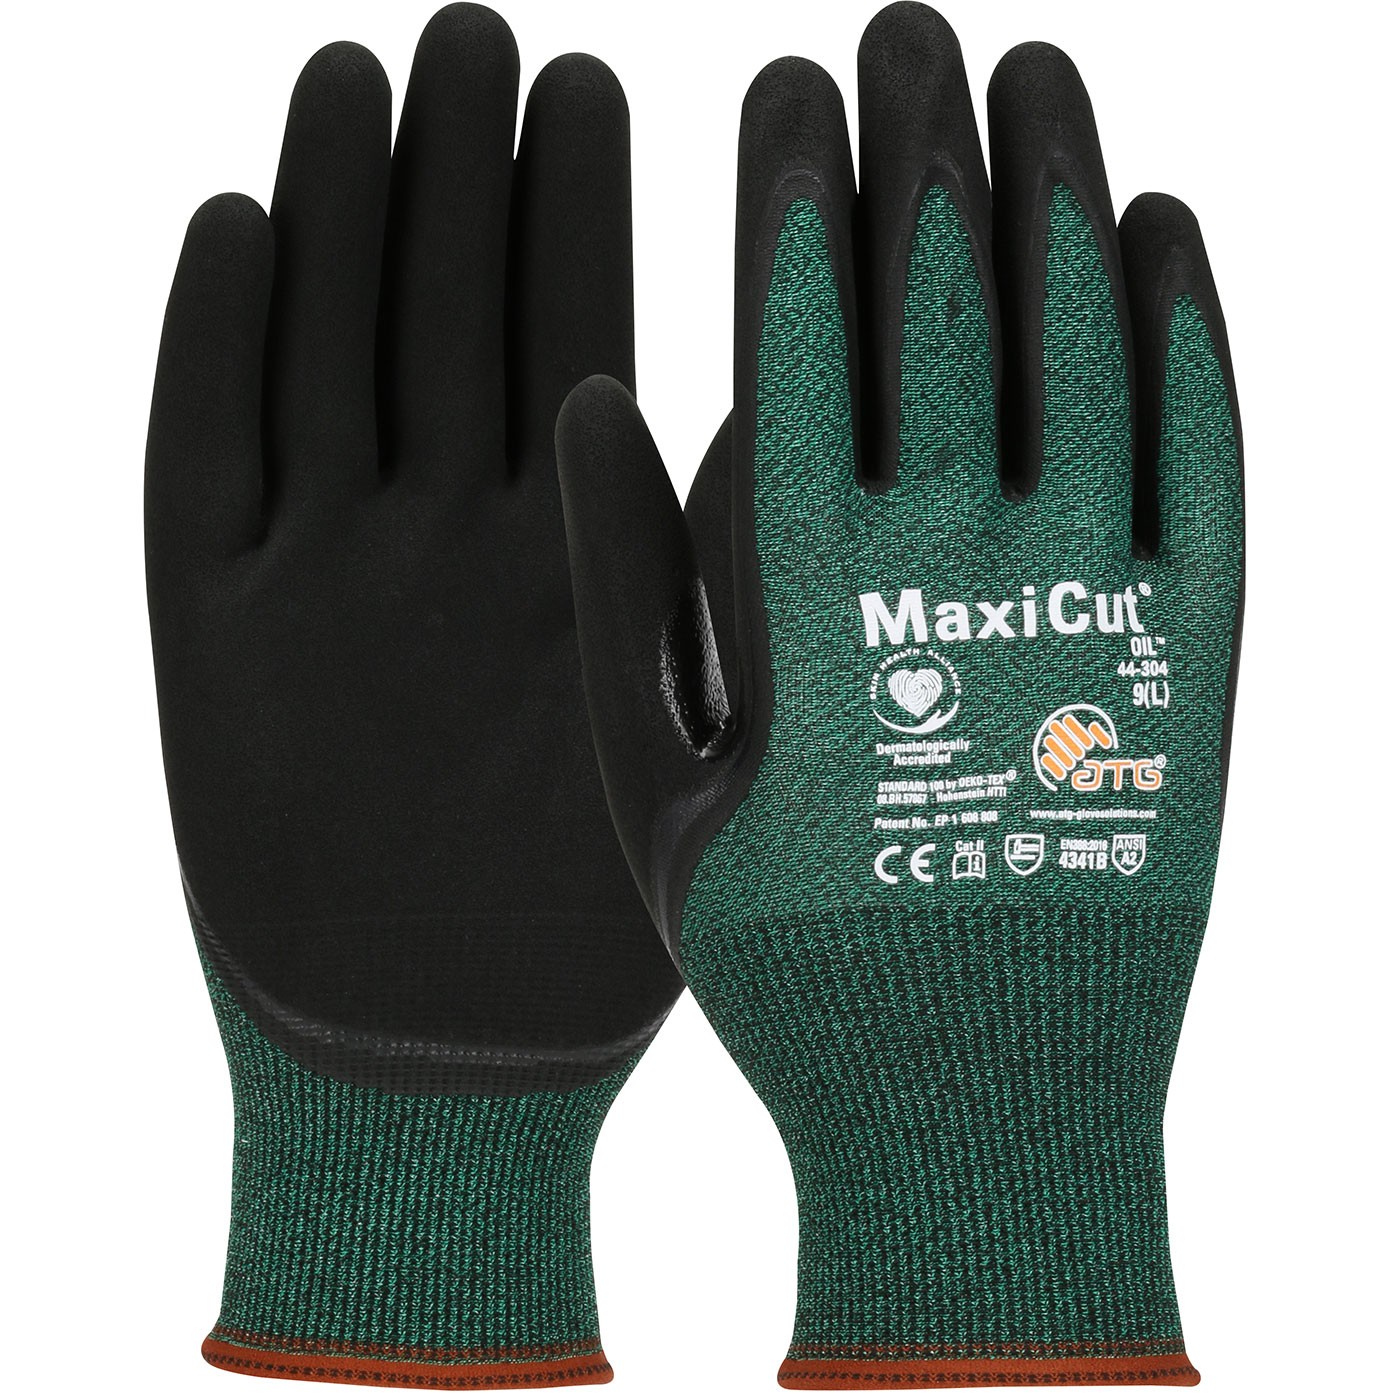 MaxiCut® Oil Seamless Knit Engineered Yarn Glove with Nitrile Coated MicroFoam Grip on Palm & Fingers  (#44-304)